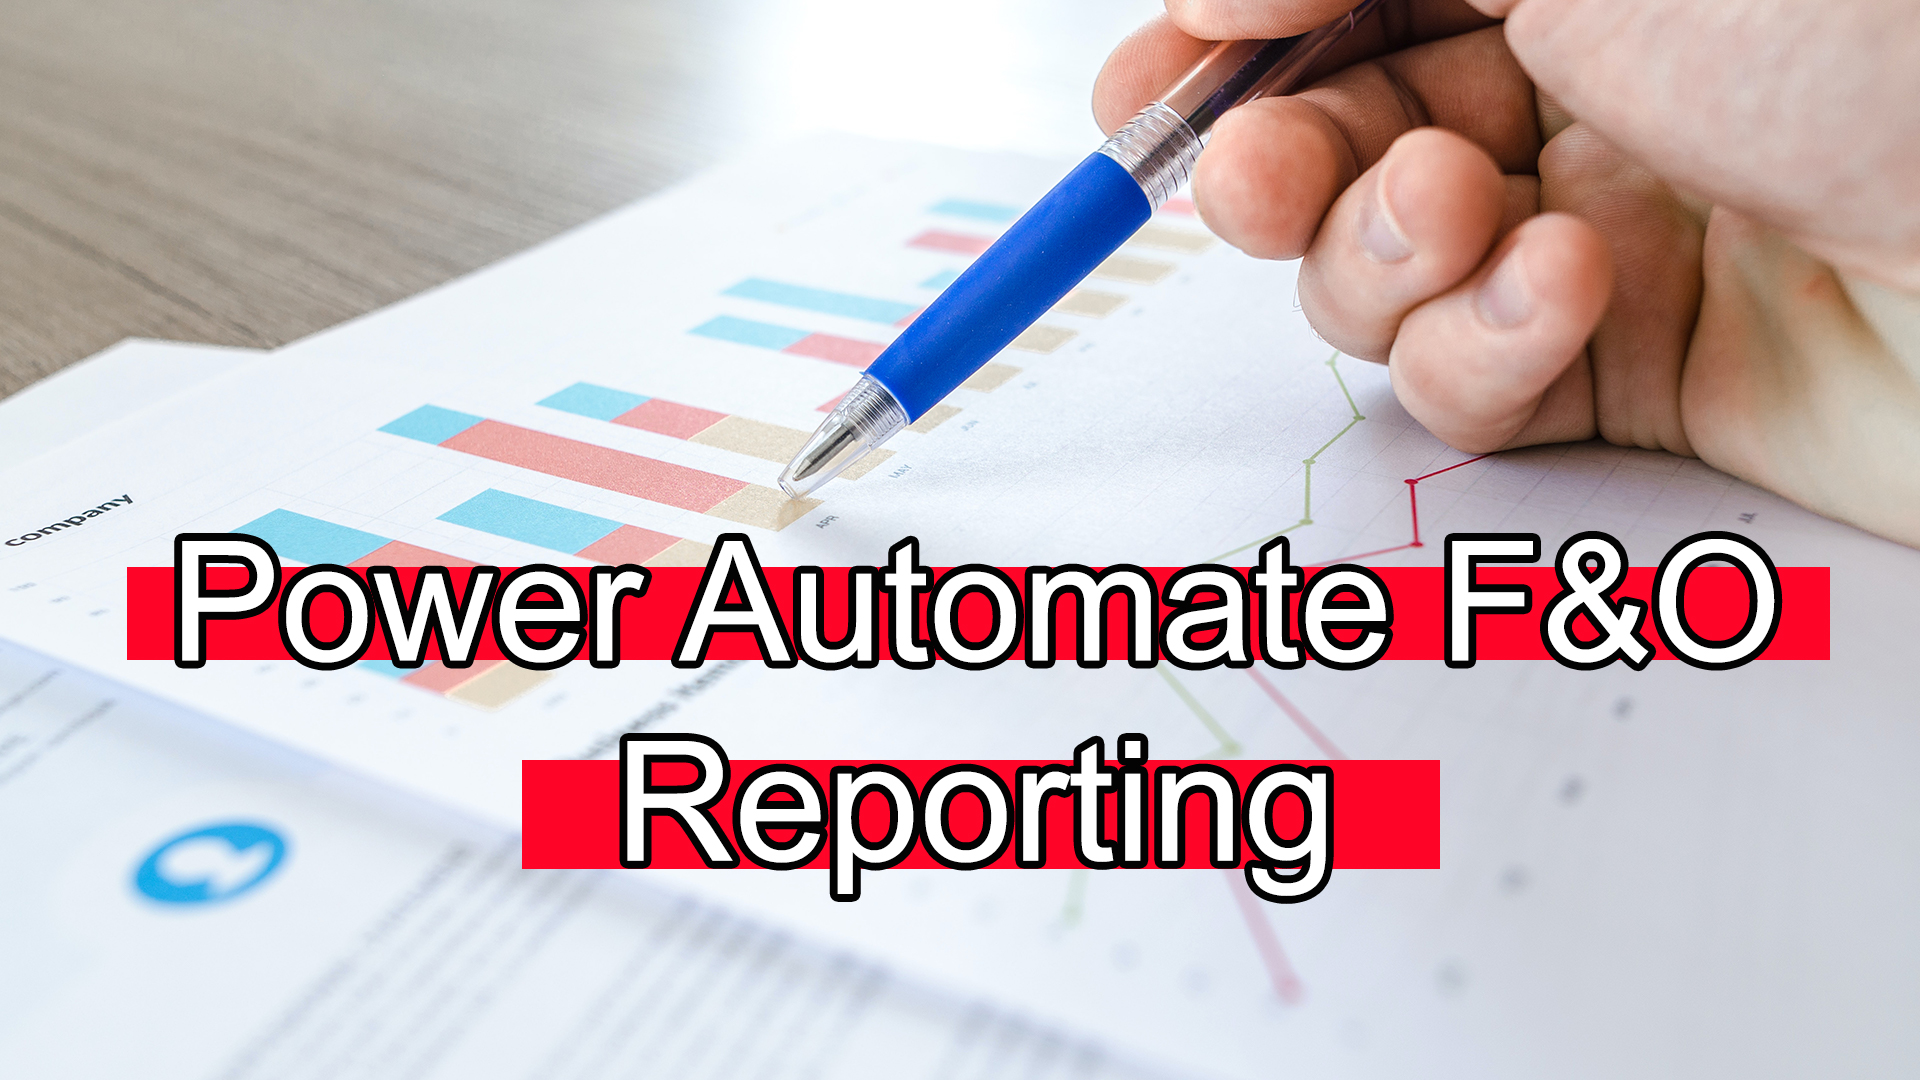 You are currently viewing Using Power Automate to Create Reports from Dynamics 365 Finance and Operations